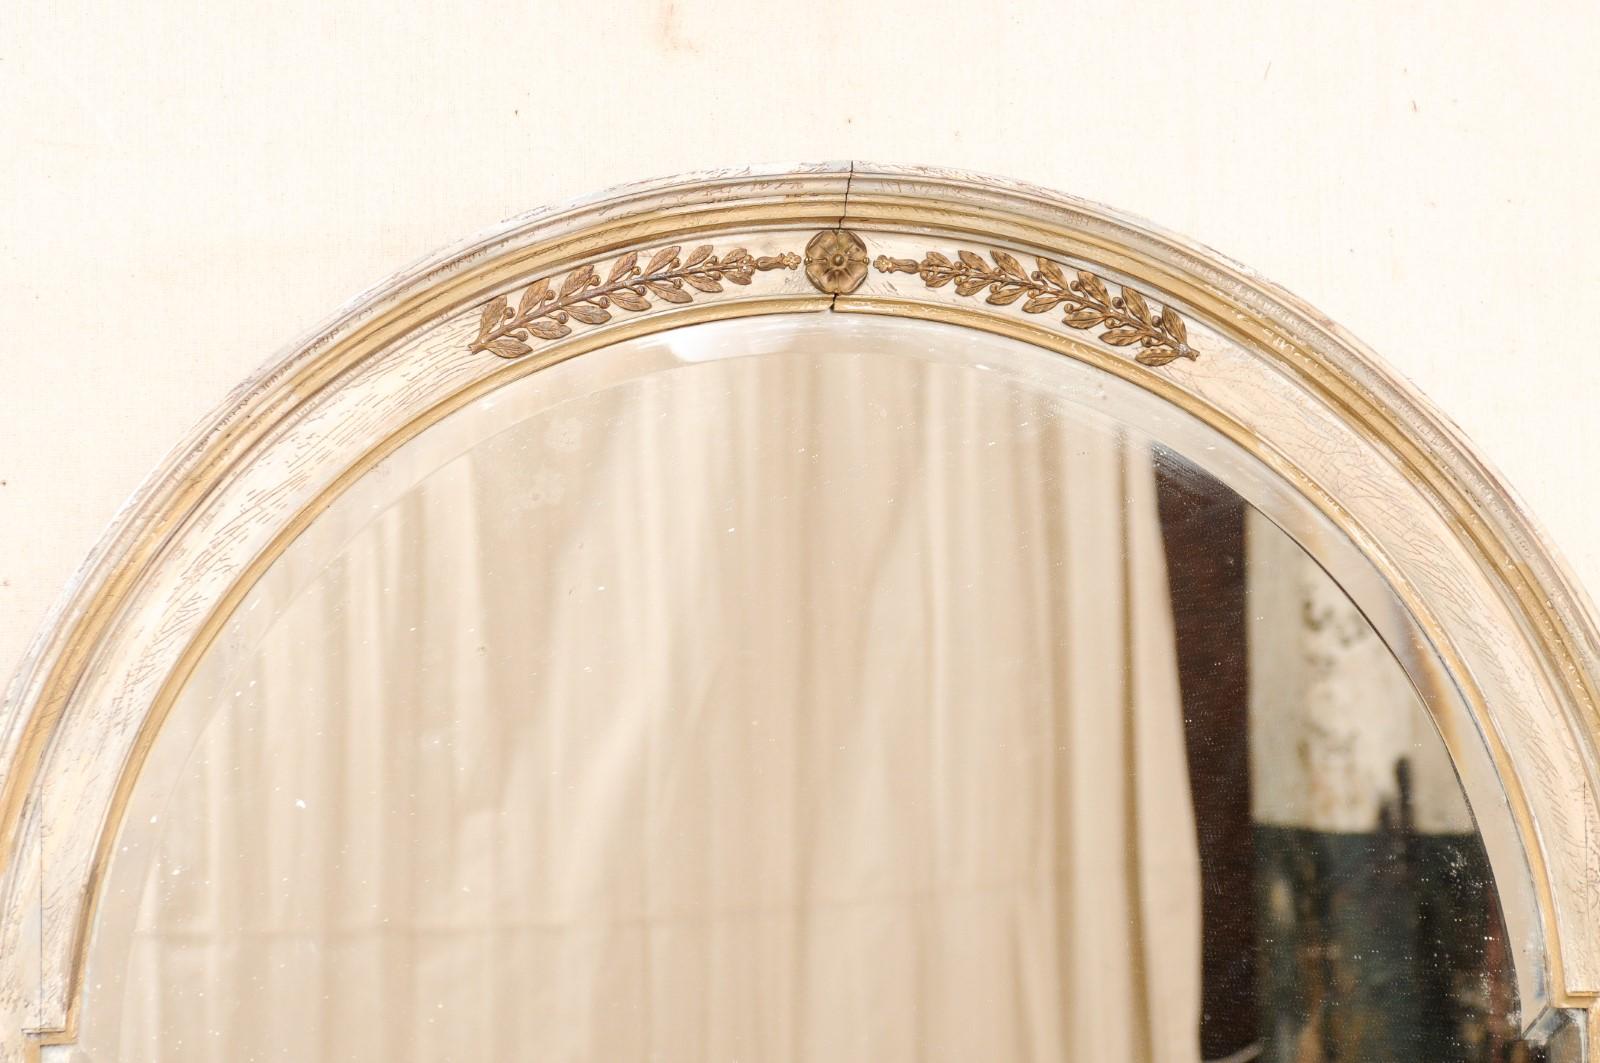 20th Century Early 20th C. French Painted Wood Mirror, Arched with Column Sides (3.5 Ft Tall) For Sale